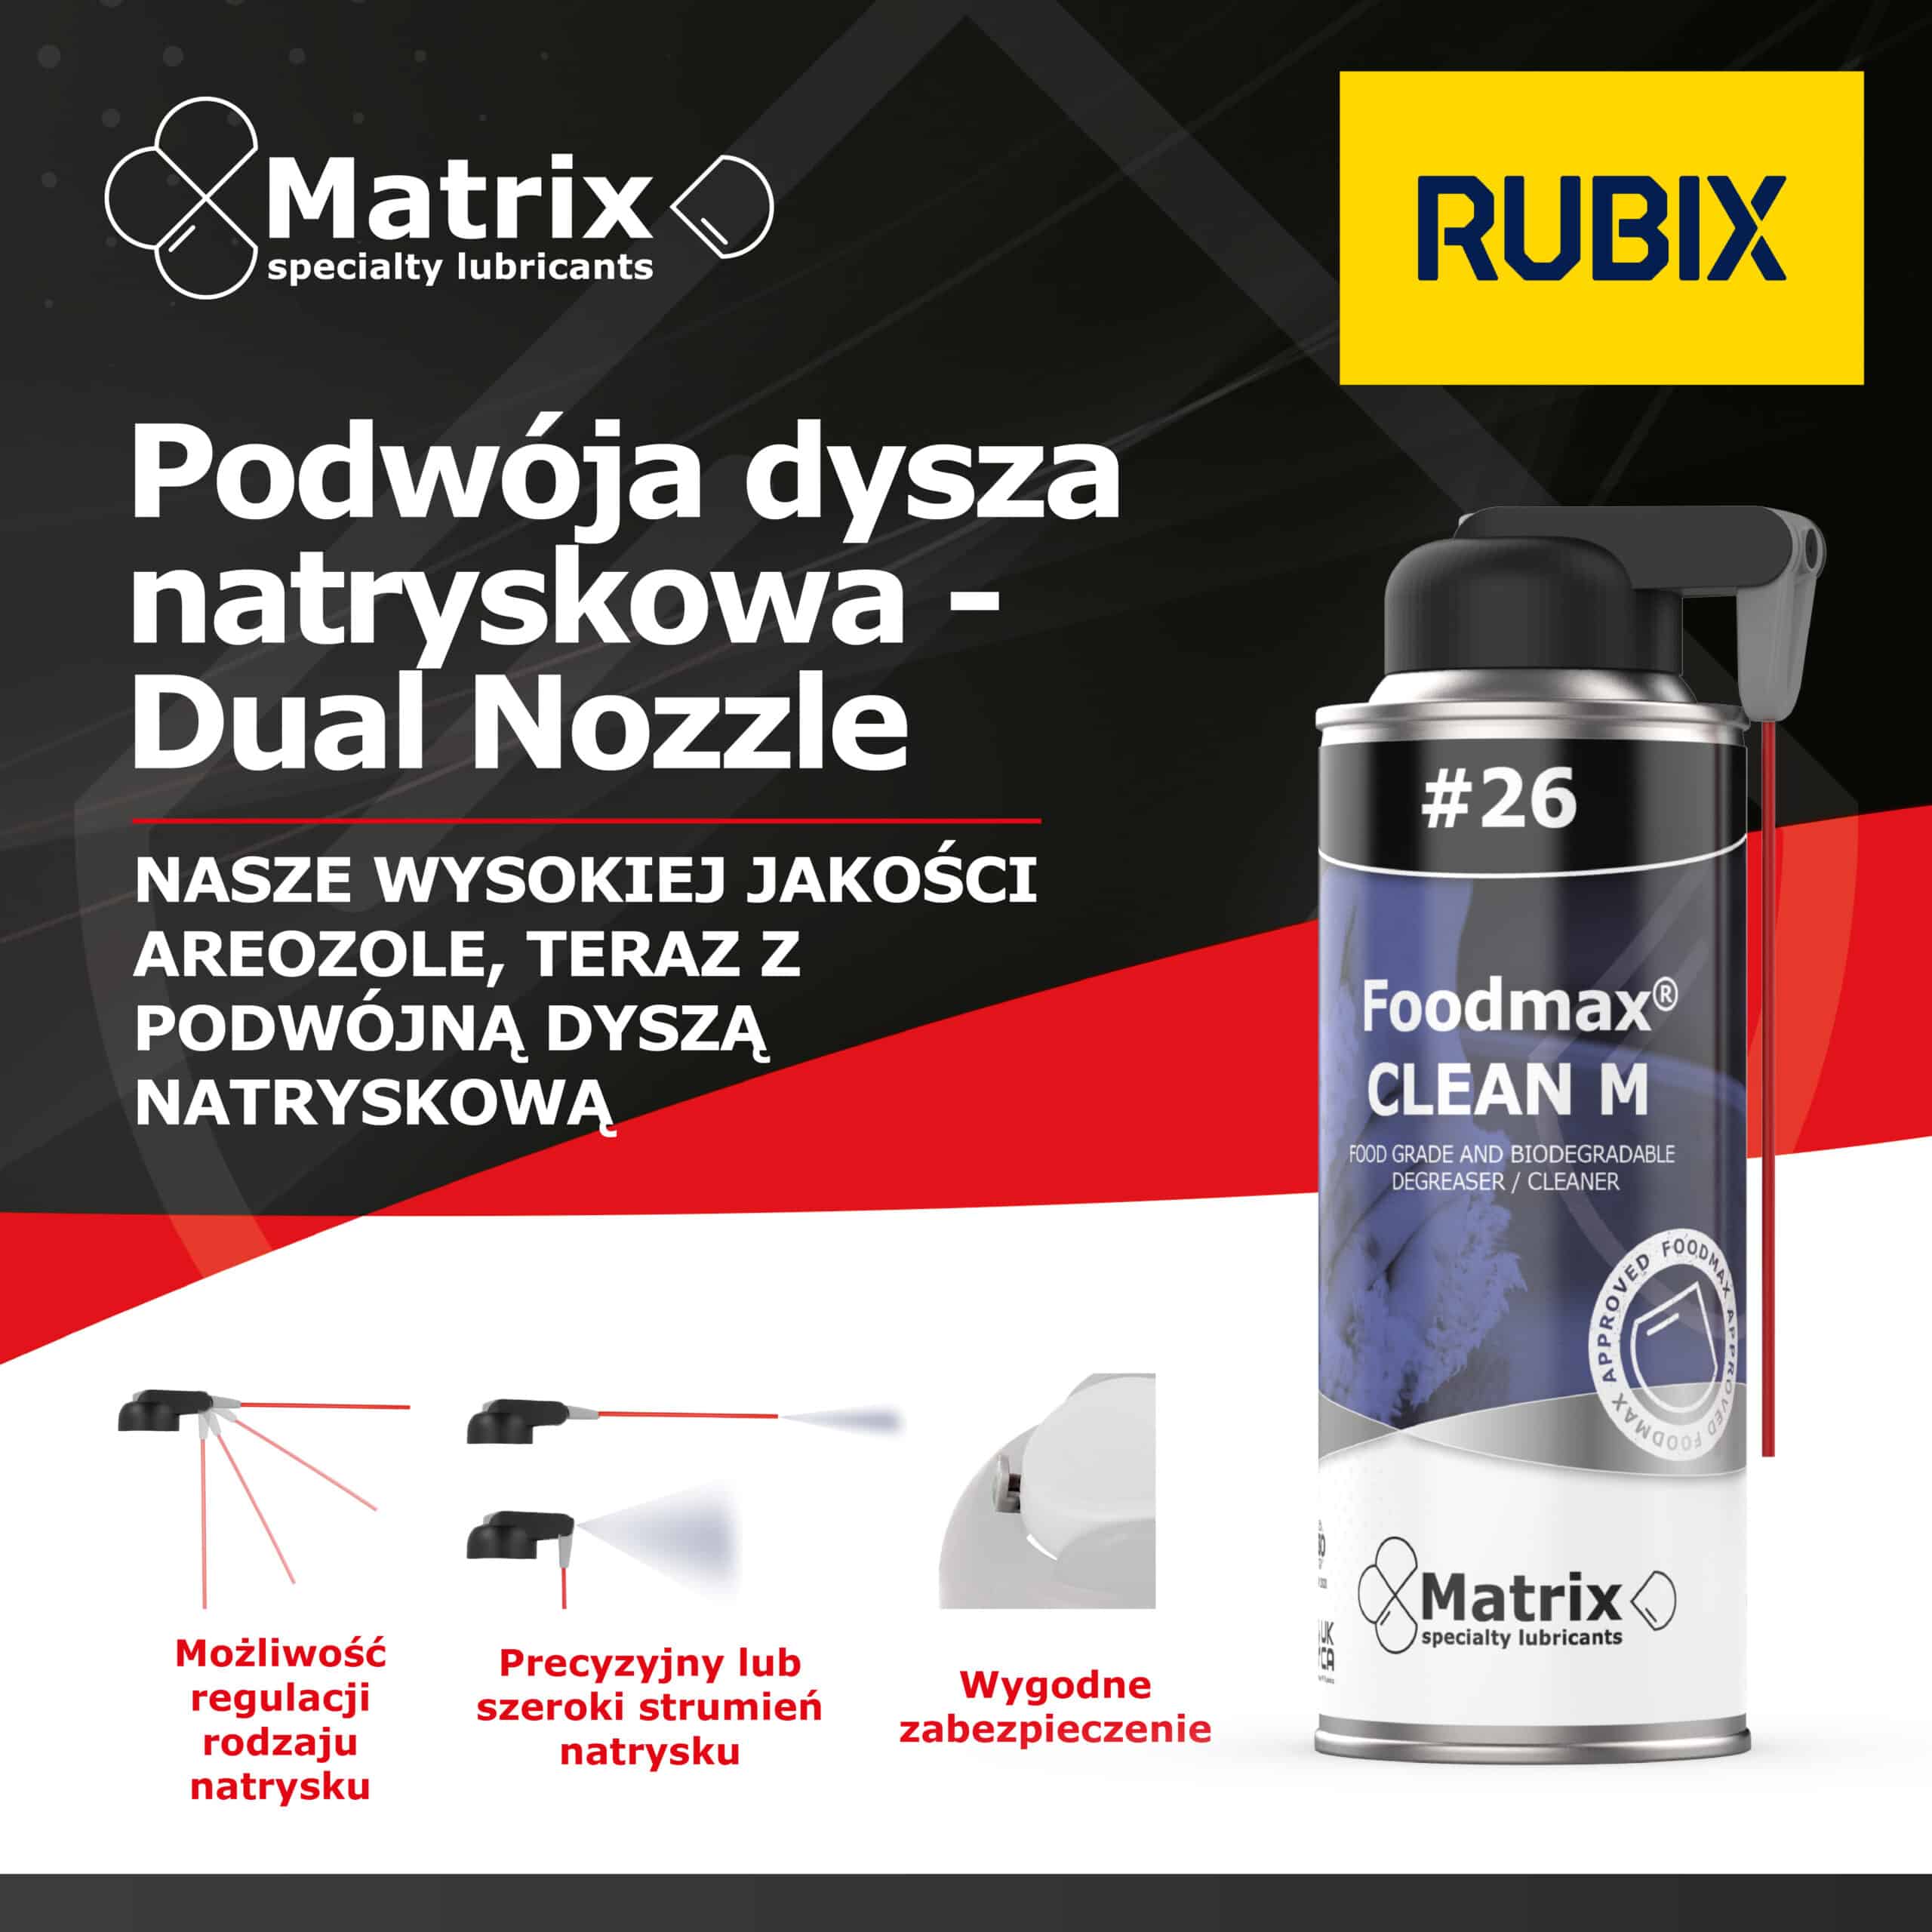 Matrix specialty lubricants Foodmax Clean M with dual nozzle spray feature, collaboration with Rubix